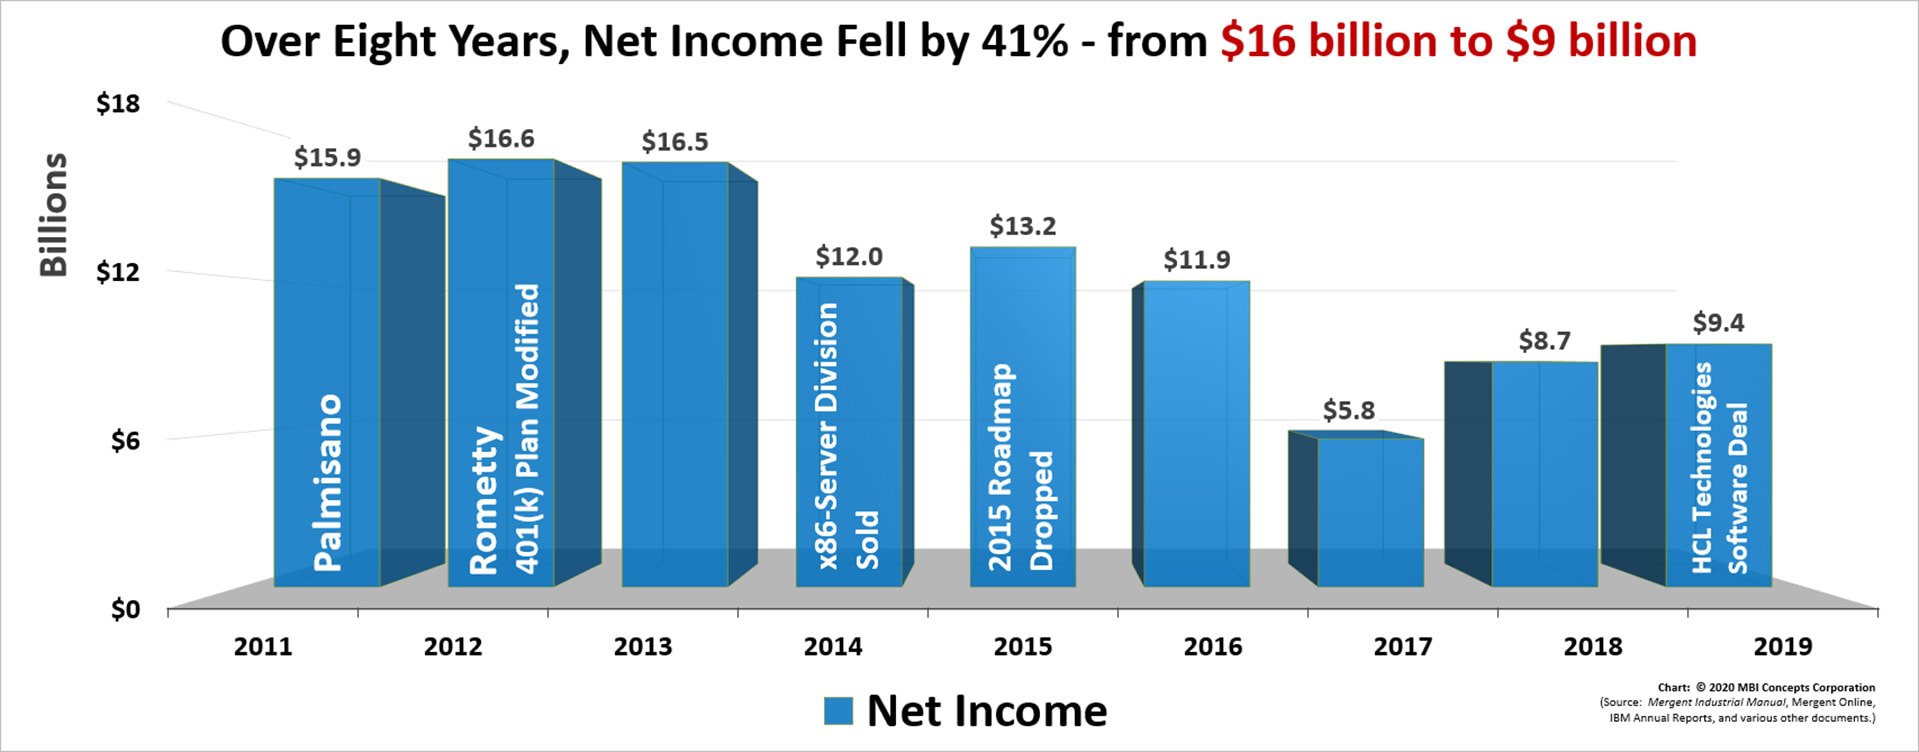 Virginia M. (Ginni) Rometty's Profit (Net Income) Performance over her eight hears as IBM's Chief Executive Officer (CEO): 2012 through 2019.